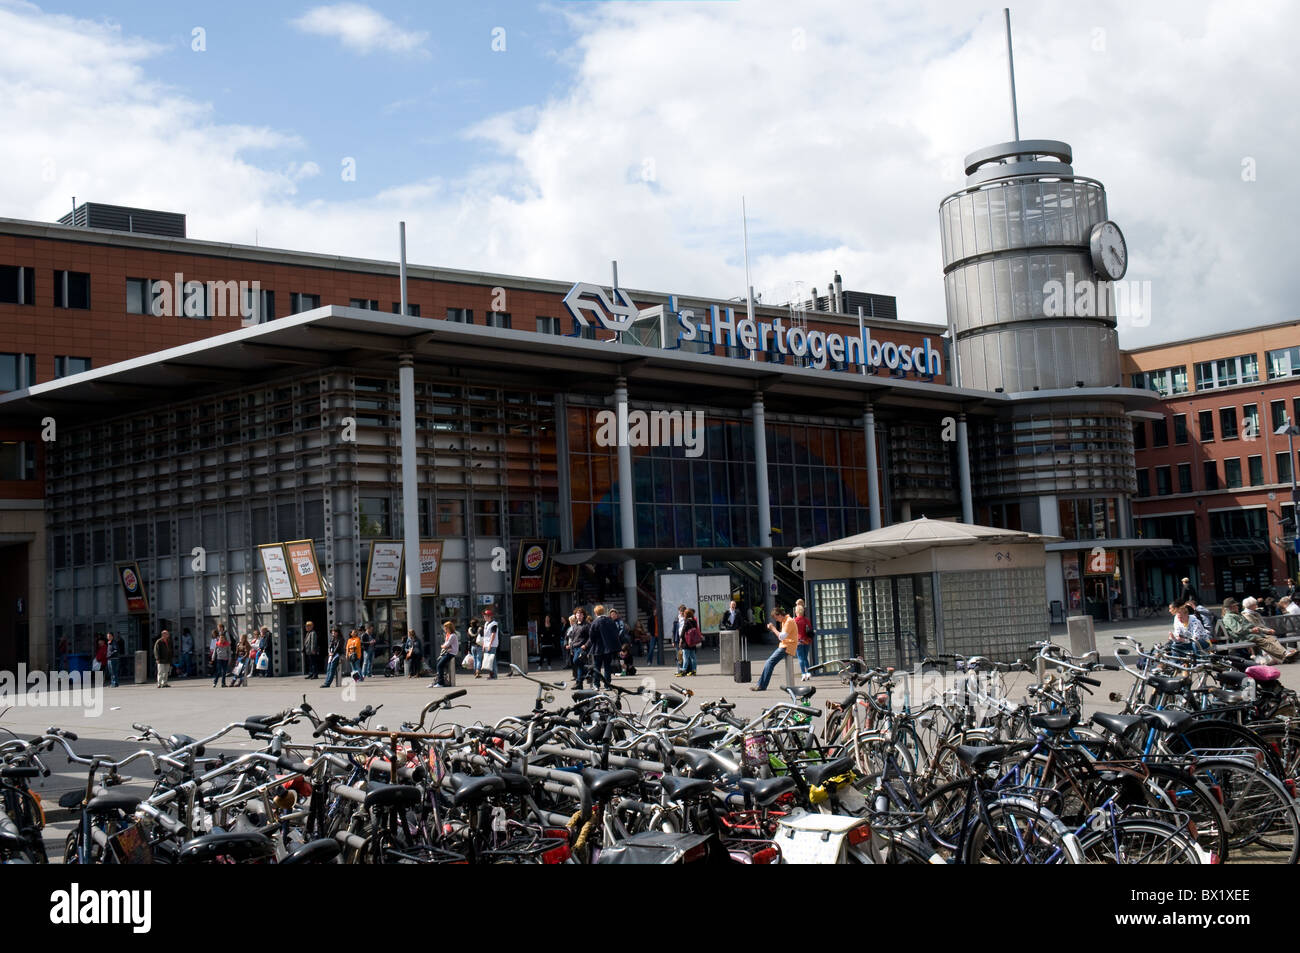 Den bosch s hertogenbosch railway station hi-res stock photography and  images - Alamy